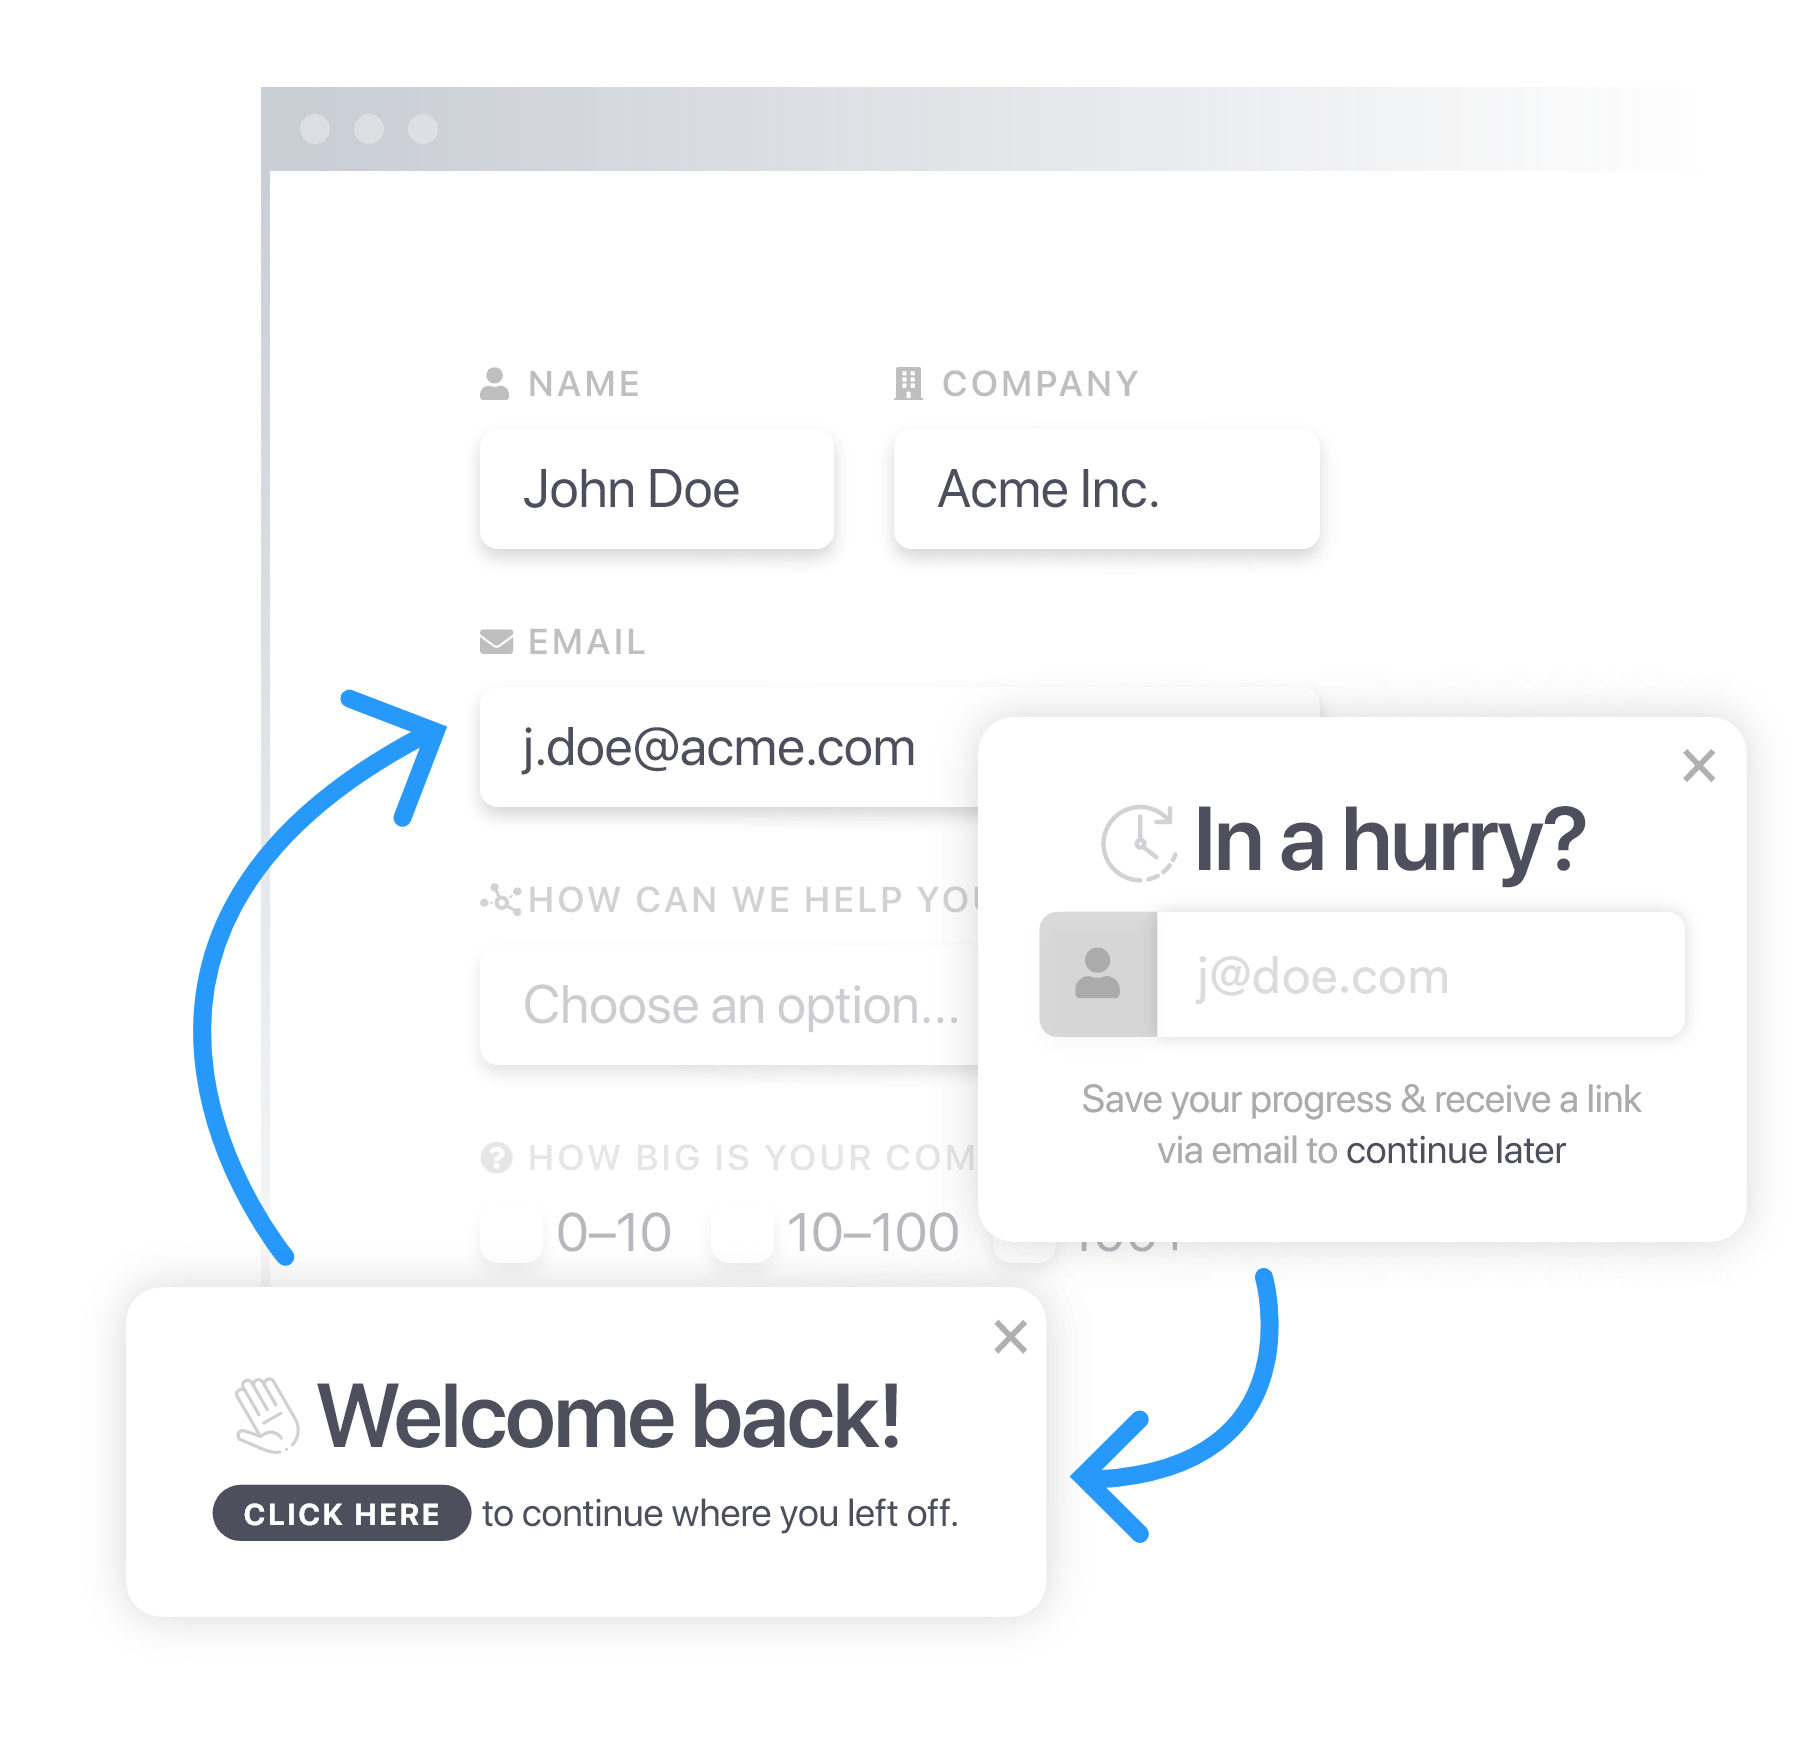 Save & continue later: allow returning users to save their progress and resume later